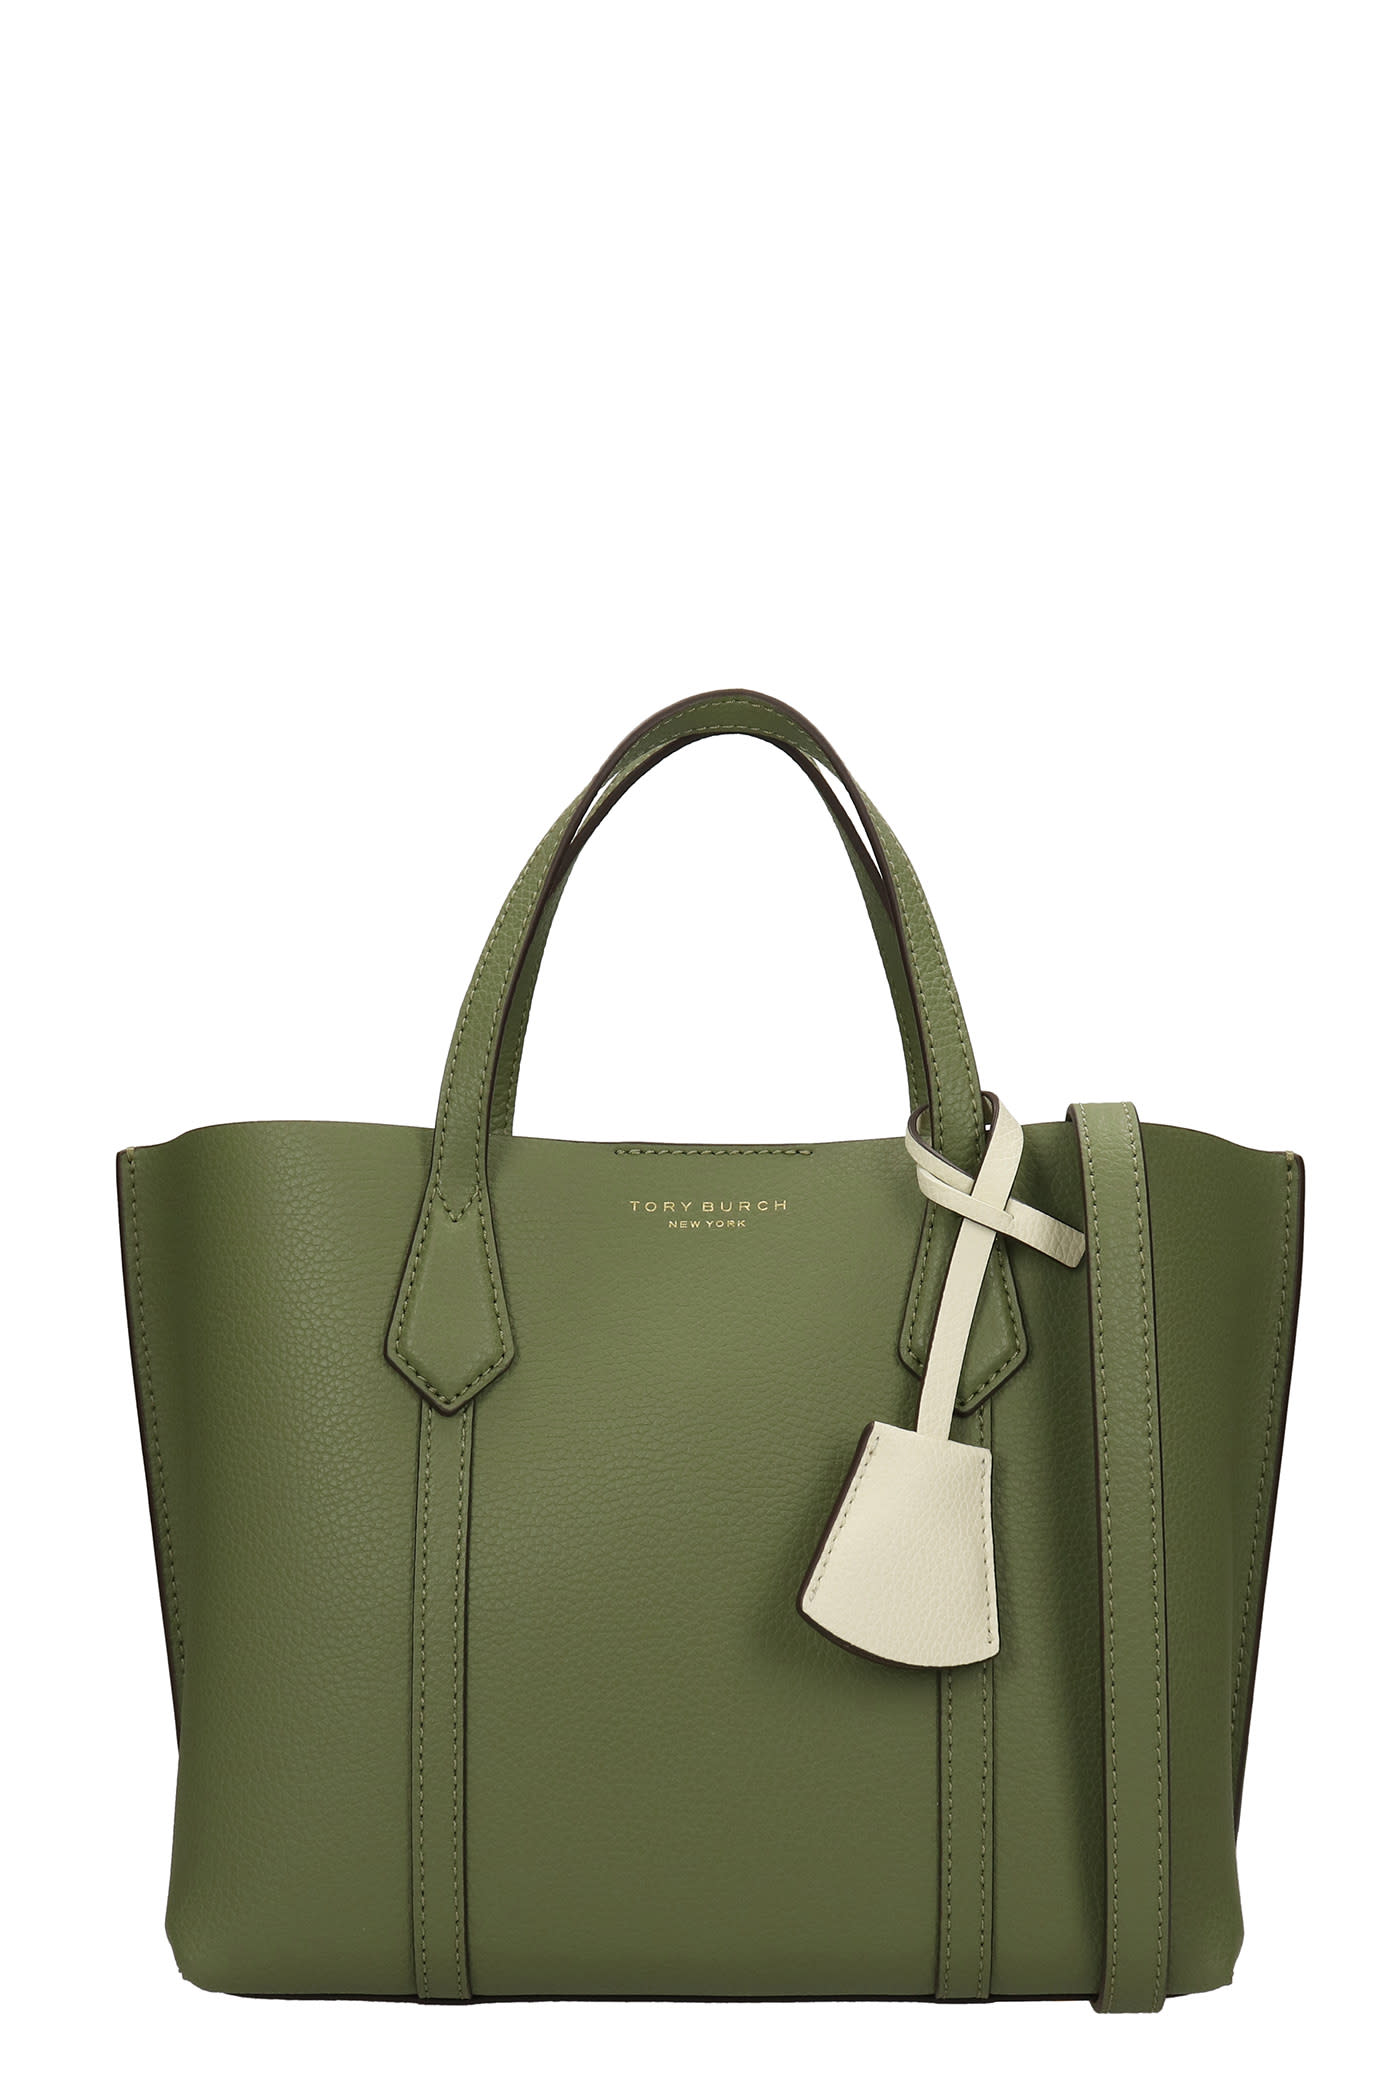 Tory Burch Perry Tote In Green Leather